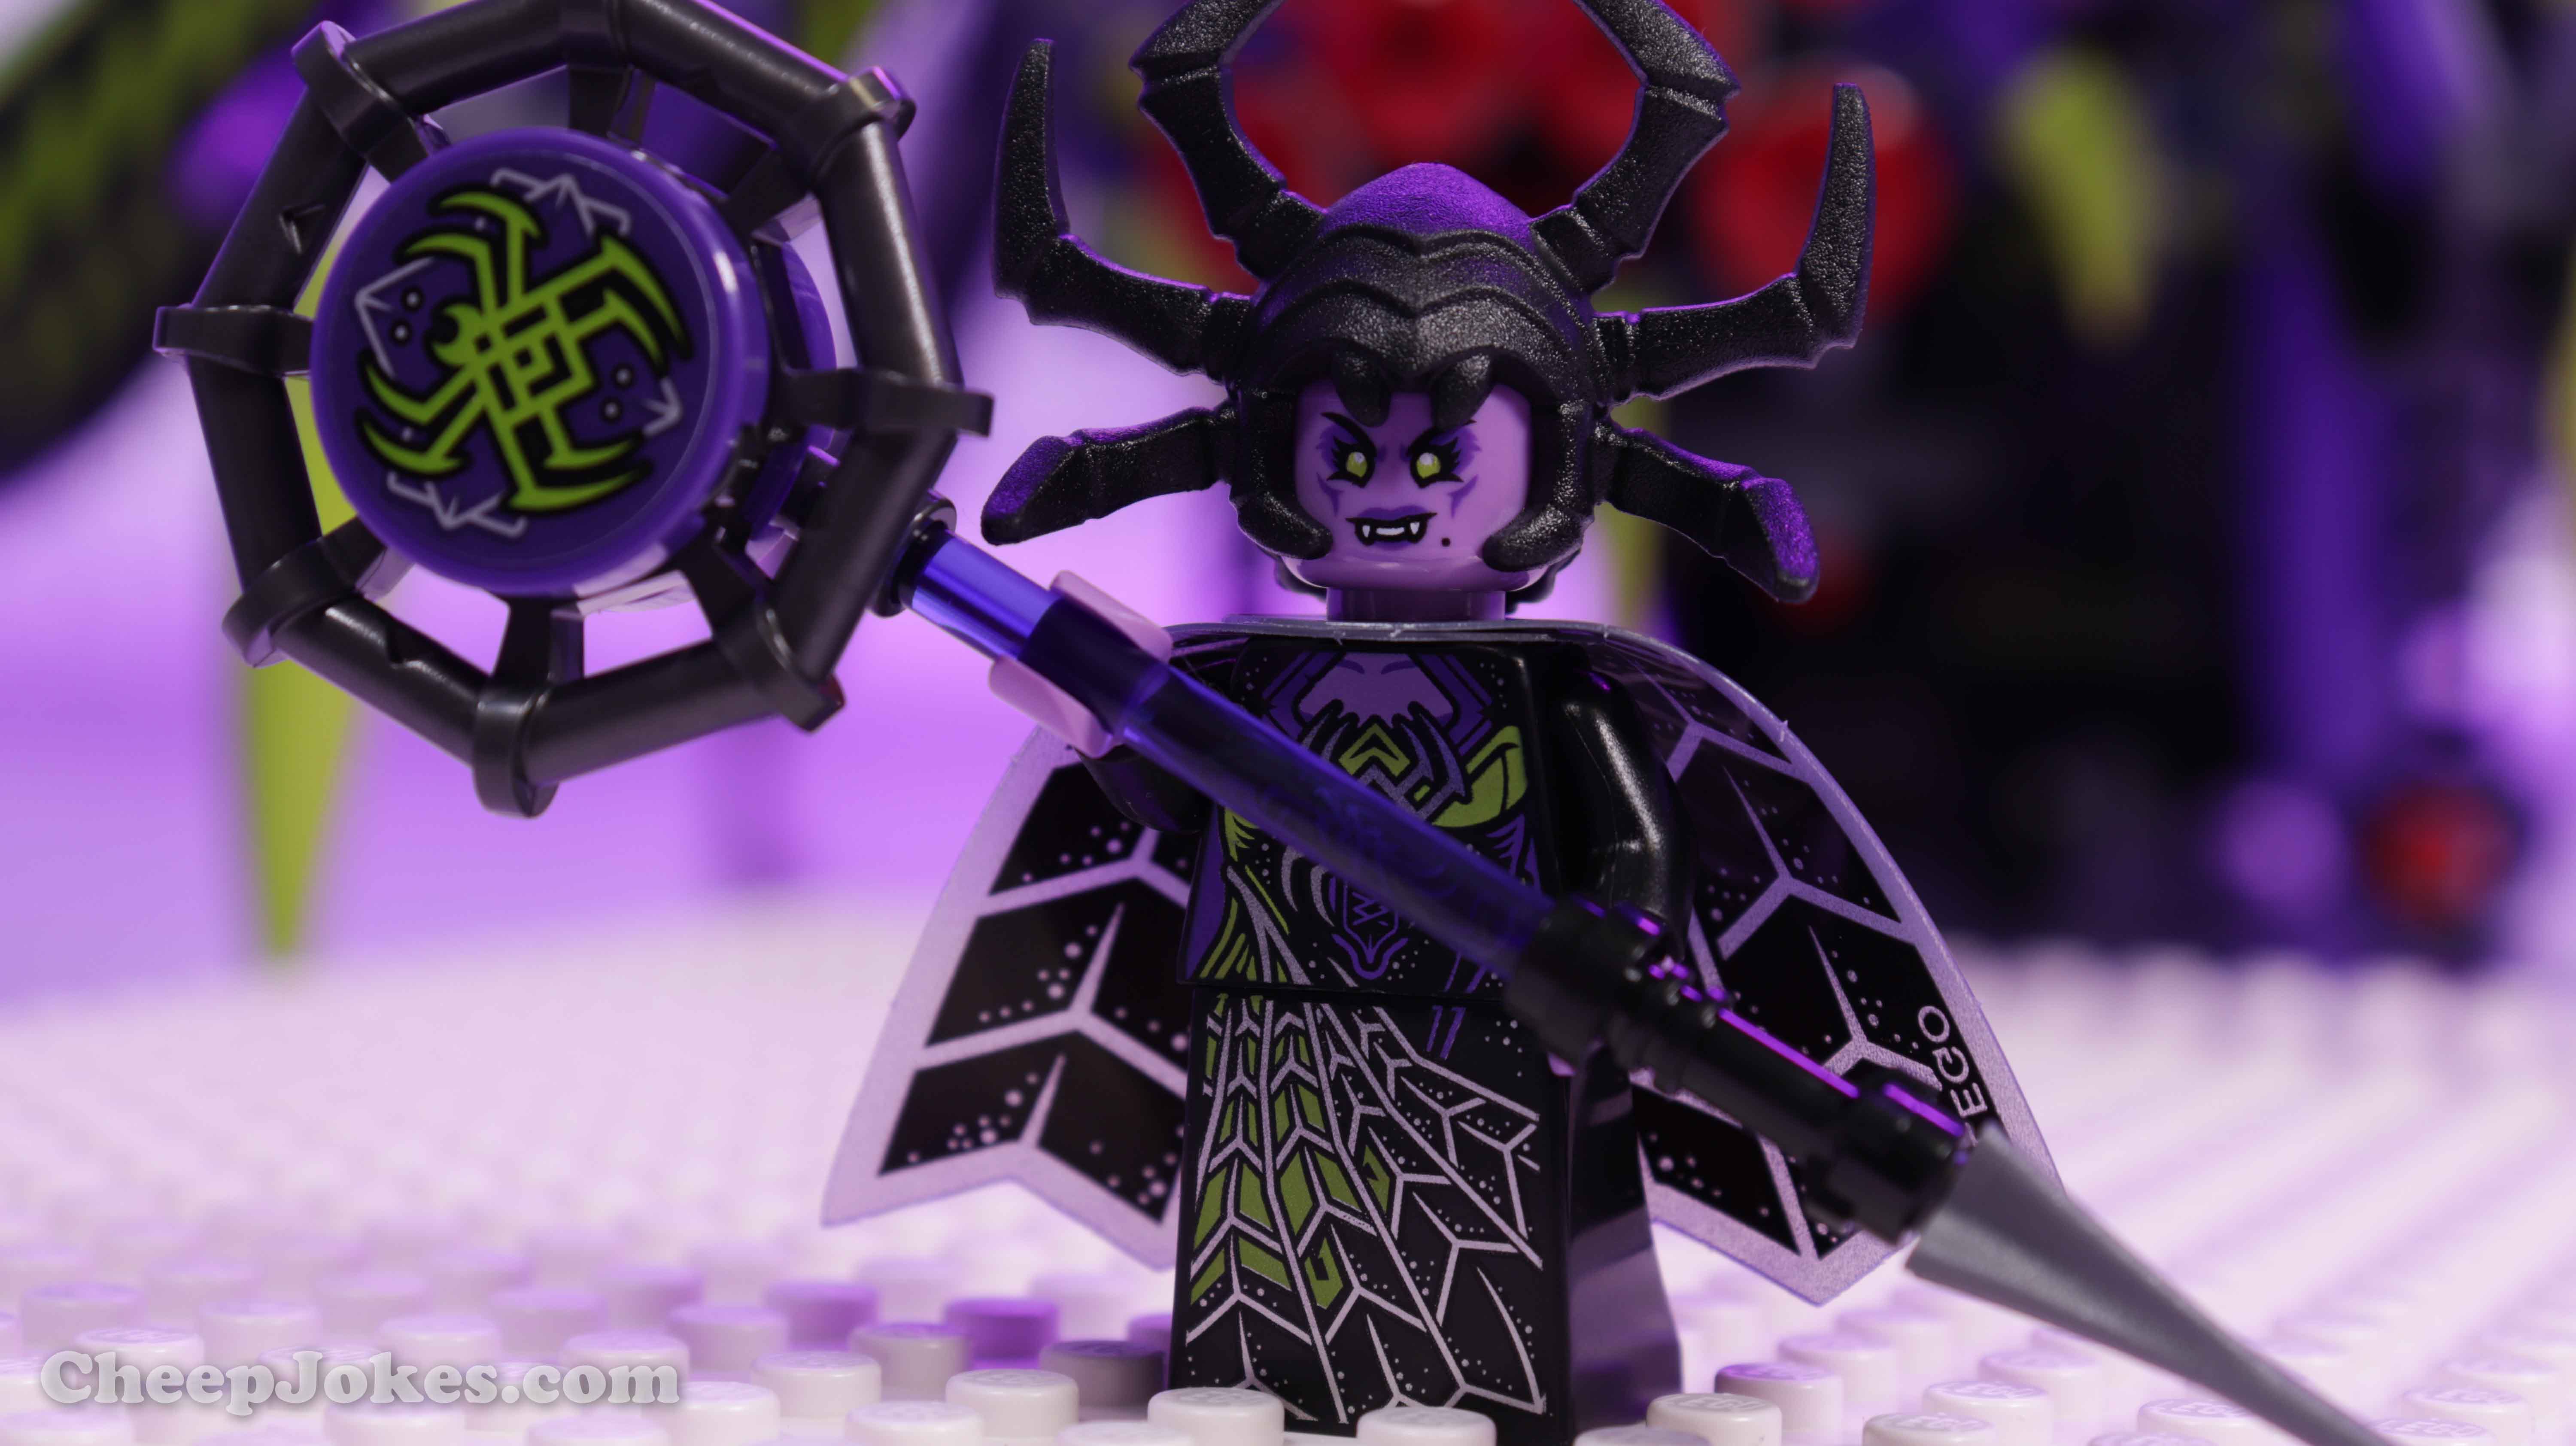 Children can create unlimited exciting adventures with this awesome LEGO® Monkie Kid™ mech toy: Spider Queen’s Arachnoid Base (80022). The posable mech has lever-operated attack pincers and opens to reveal a minifigure prison and the Spider Queen’s lab for building robotic spiders. A hot gift toy for trend-setting kids, this unique playset features 6 minifigures, including Monkey King and Monkie Kid with The Golden Staff, which converts into a flyer for battle action.